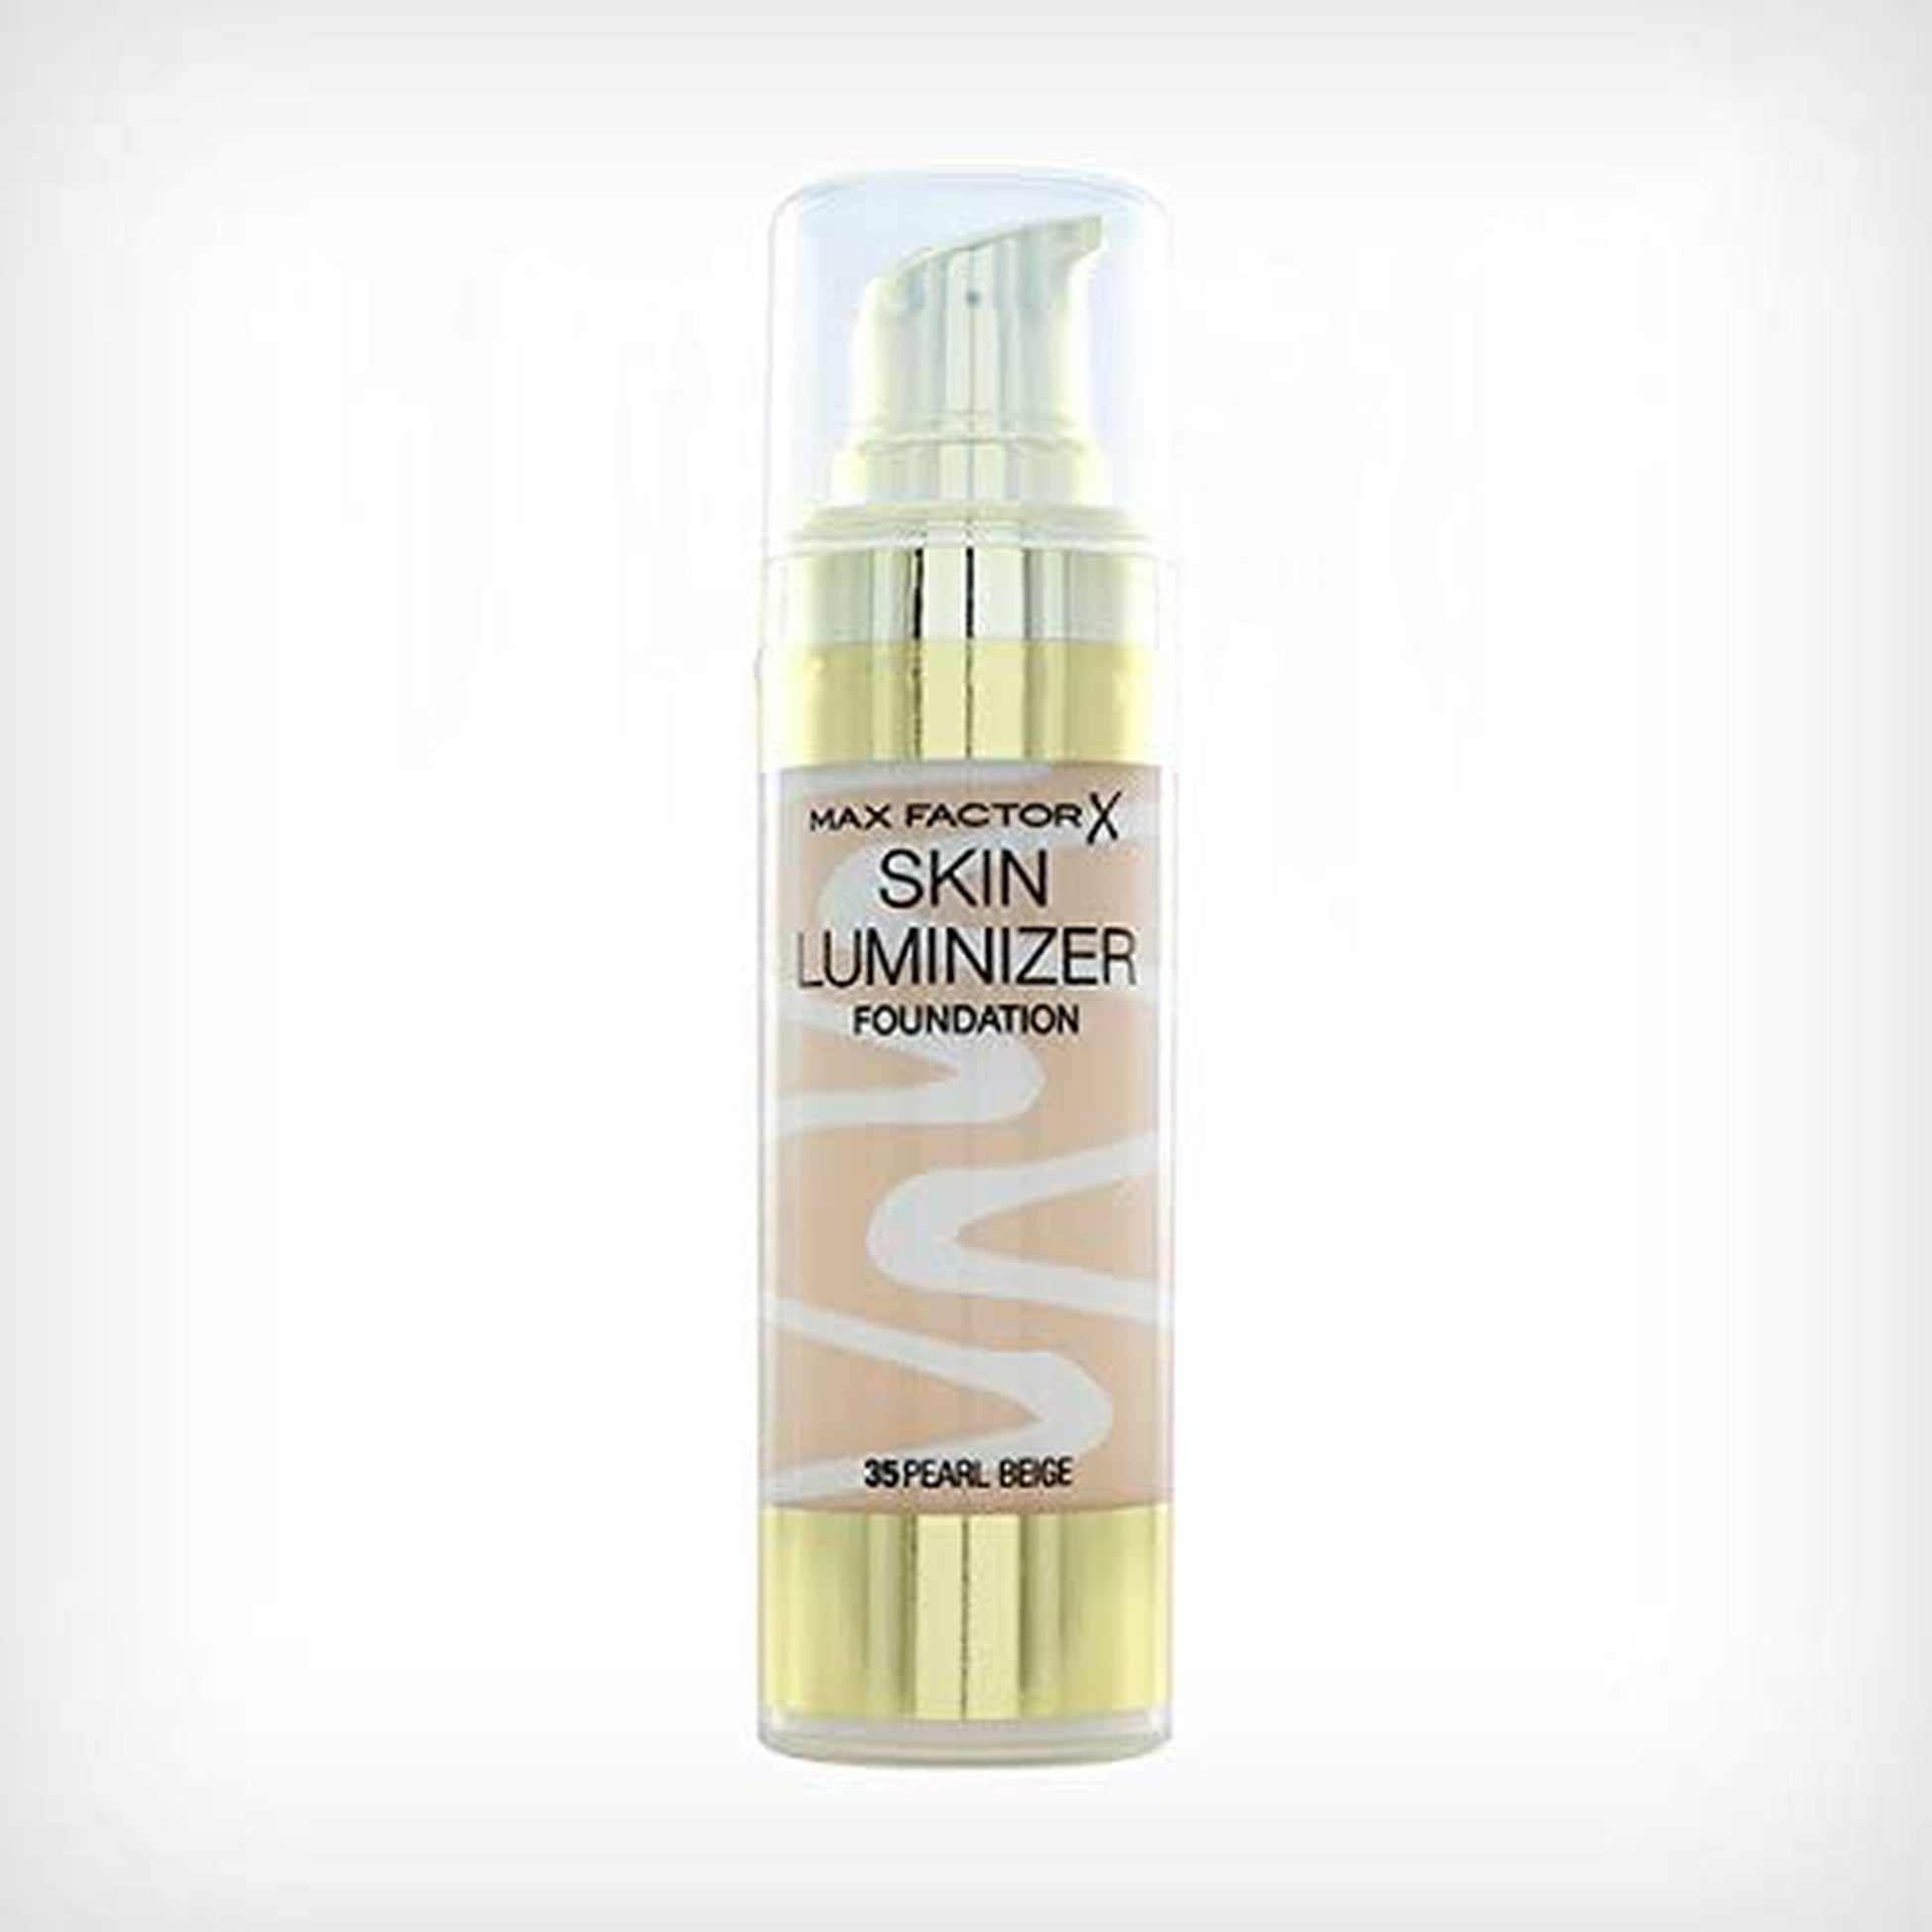 Max Factor Skin Luminizer Foundation - 35 Pearl Beige-Max Factor-BeautyNmakeup.co.uk